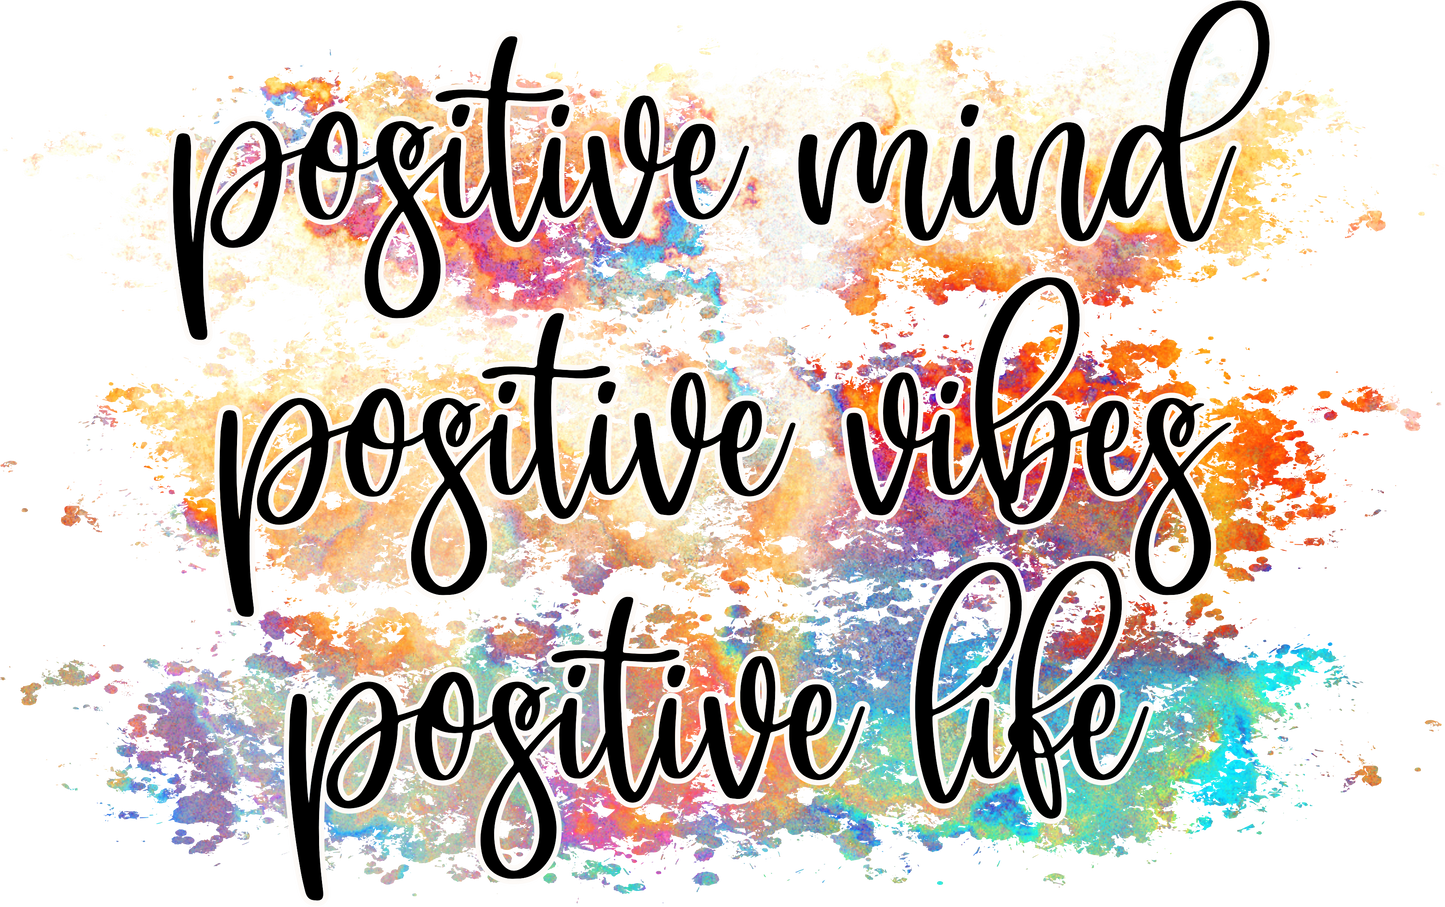 Positive Mind, Vibes, Life Clear, Vinyl Sticker, 3x3 in.